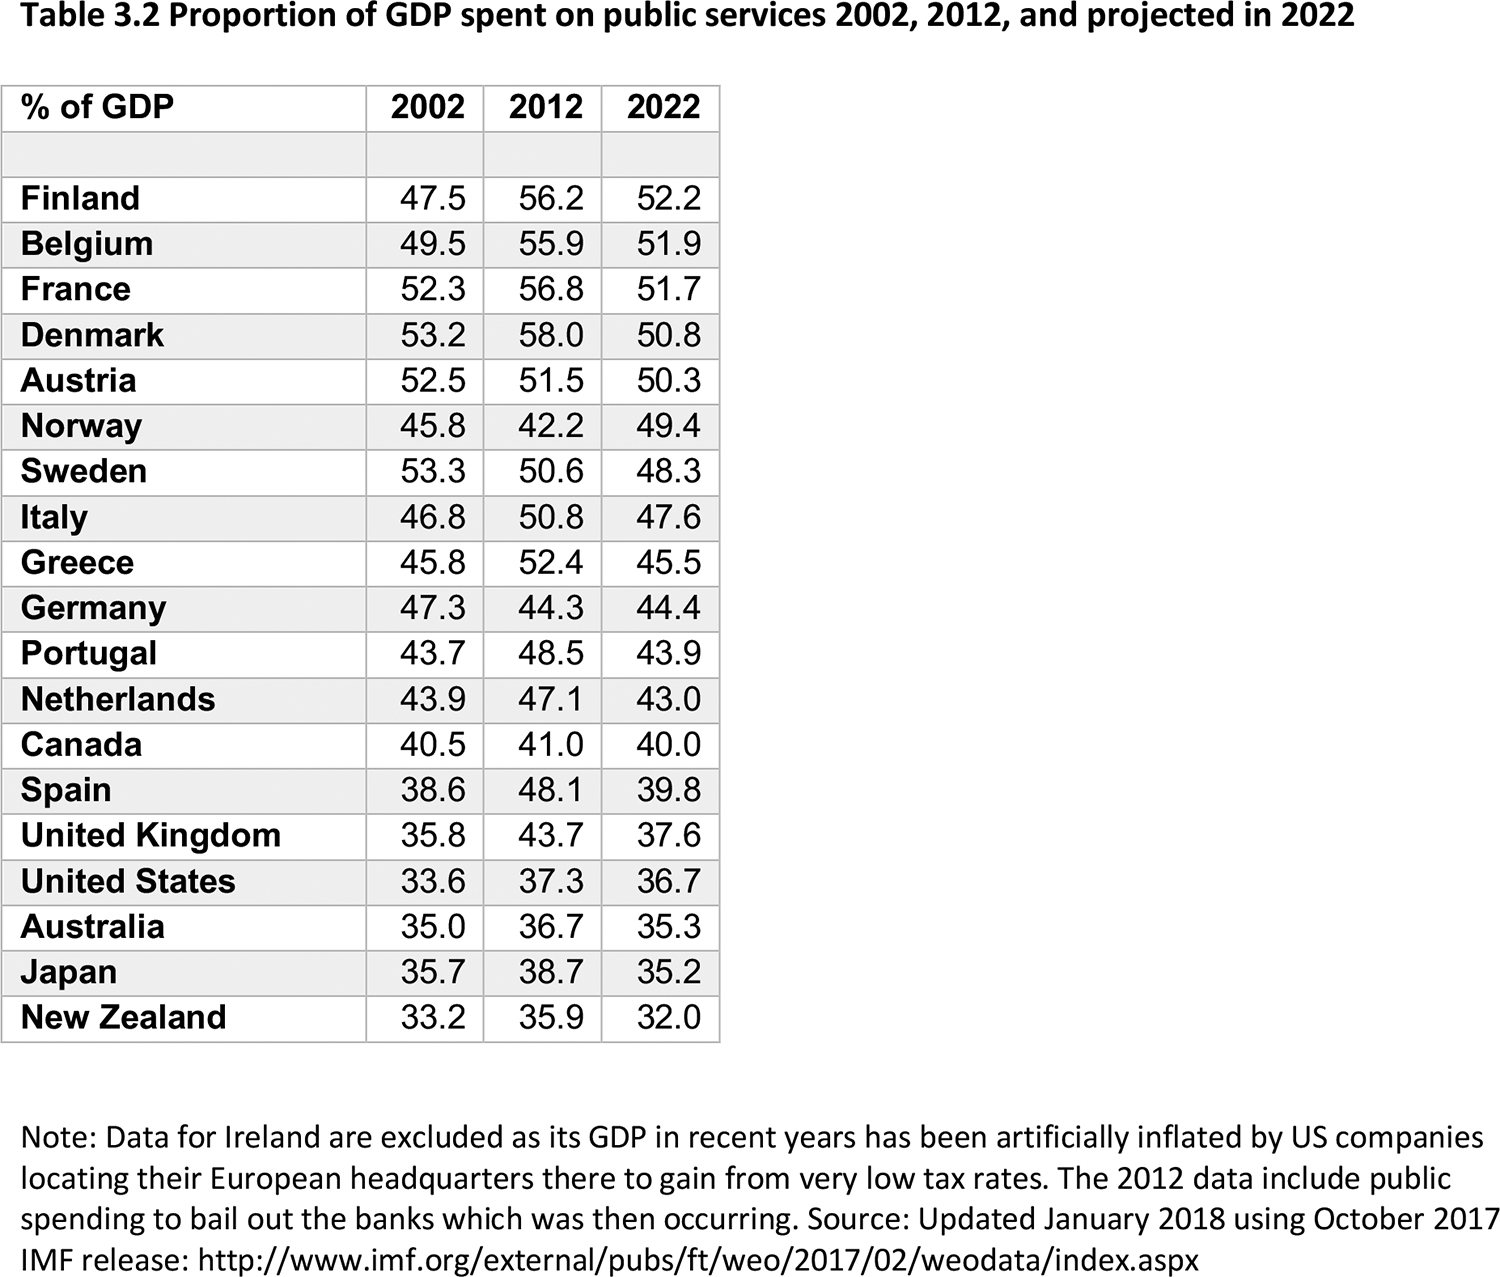 Table 3.2: Note: Data for Ireland are excluded as its GDP in recent years has been artificially inflated by US companies locating their European headquarters there to gain from very low tax rates. The 2012 data include public spending to bail out the banks which was then occurring. Source: Updated January 2018 using October 2017 IMF release: http://www.imf.org/external/pubs/ft/weo/2017/02/weodata/index.aspx